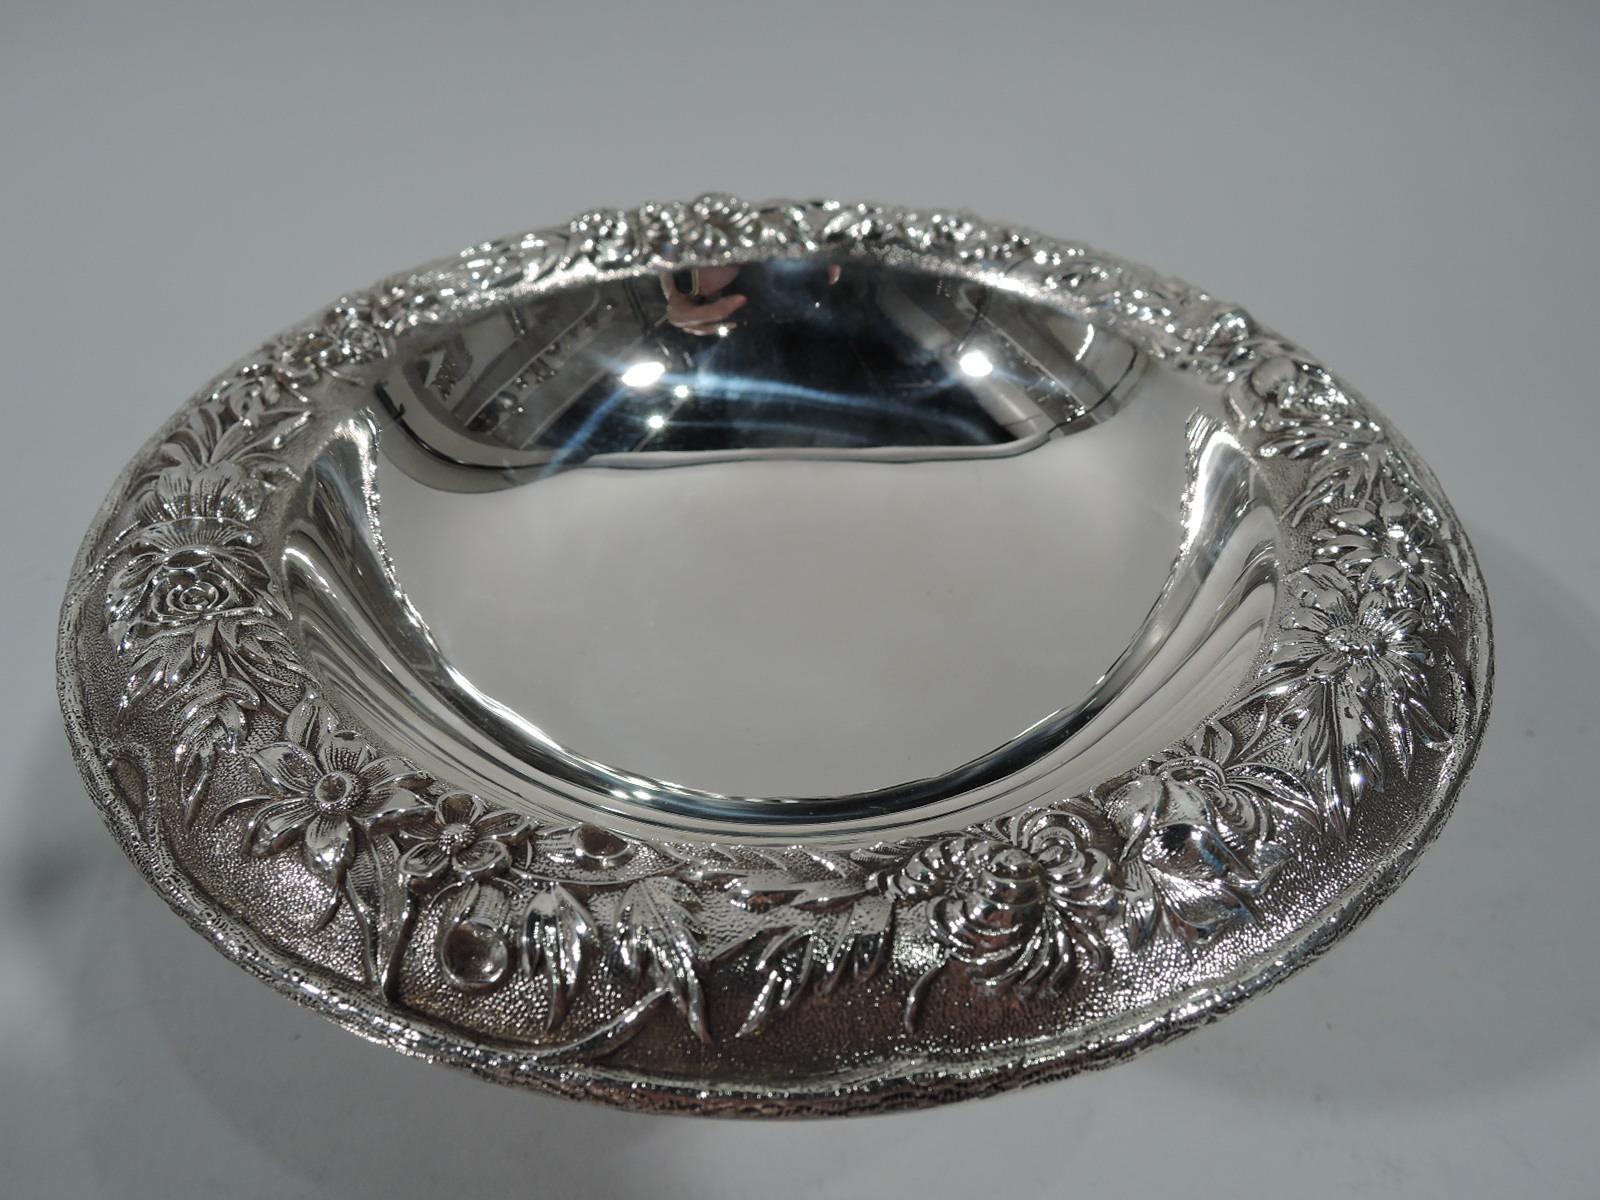 Old fashioned sterling silver compote. Made by S. Kirk & Son in Baltimore. Deep round bowl with curved rim, spool support, and stepped round foot. Rim has repousse floral garland on stippled ground. Hallmark (1932-61). Number 436. Weight: 6.4 troy